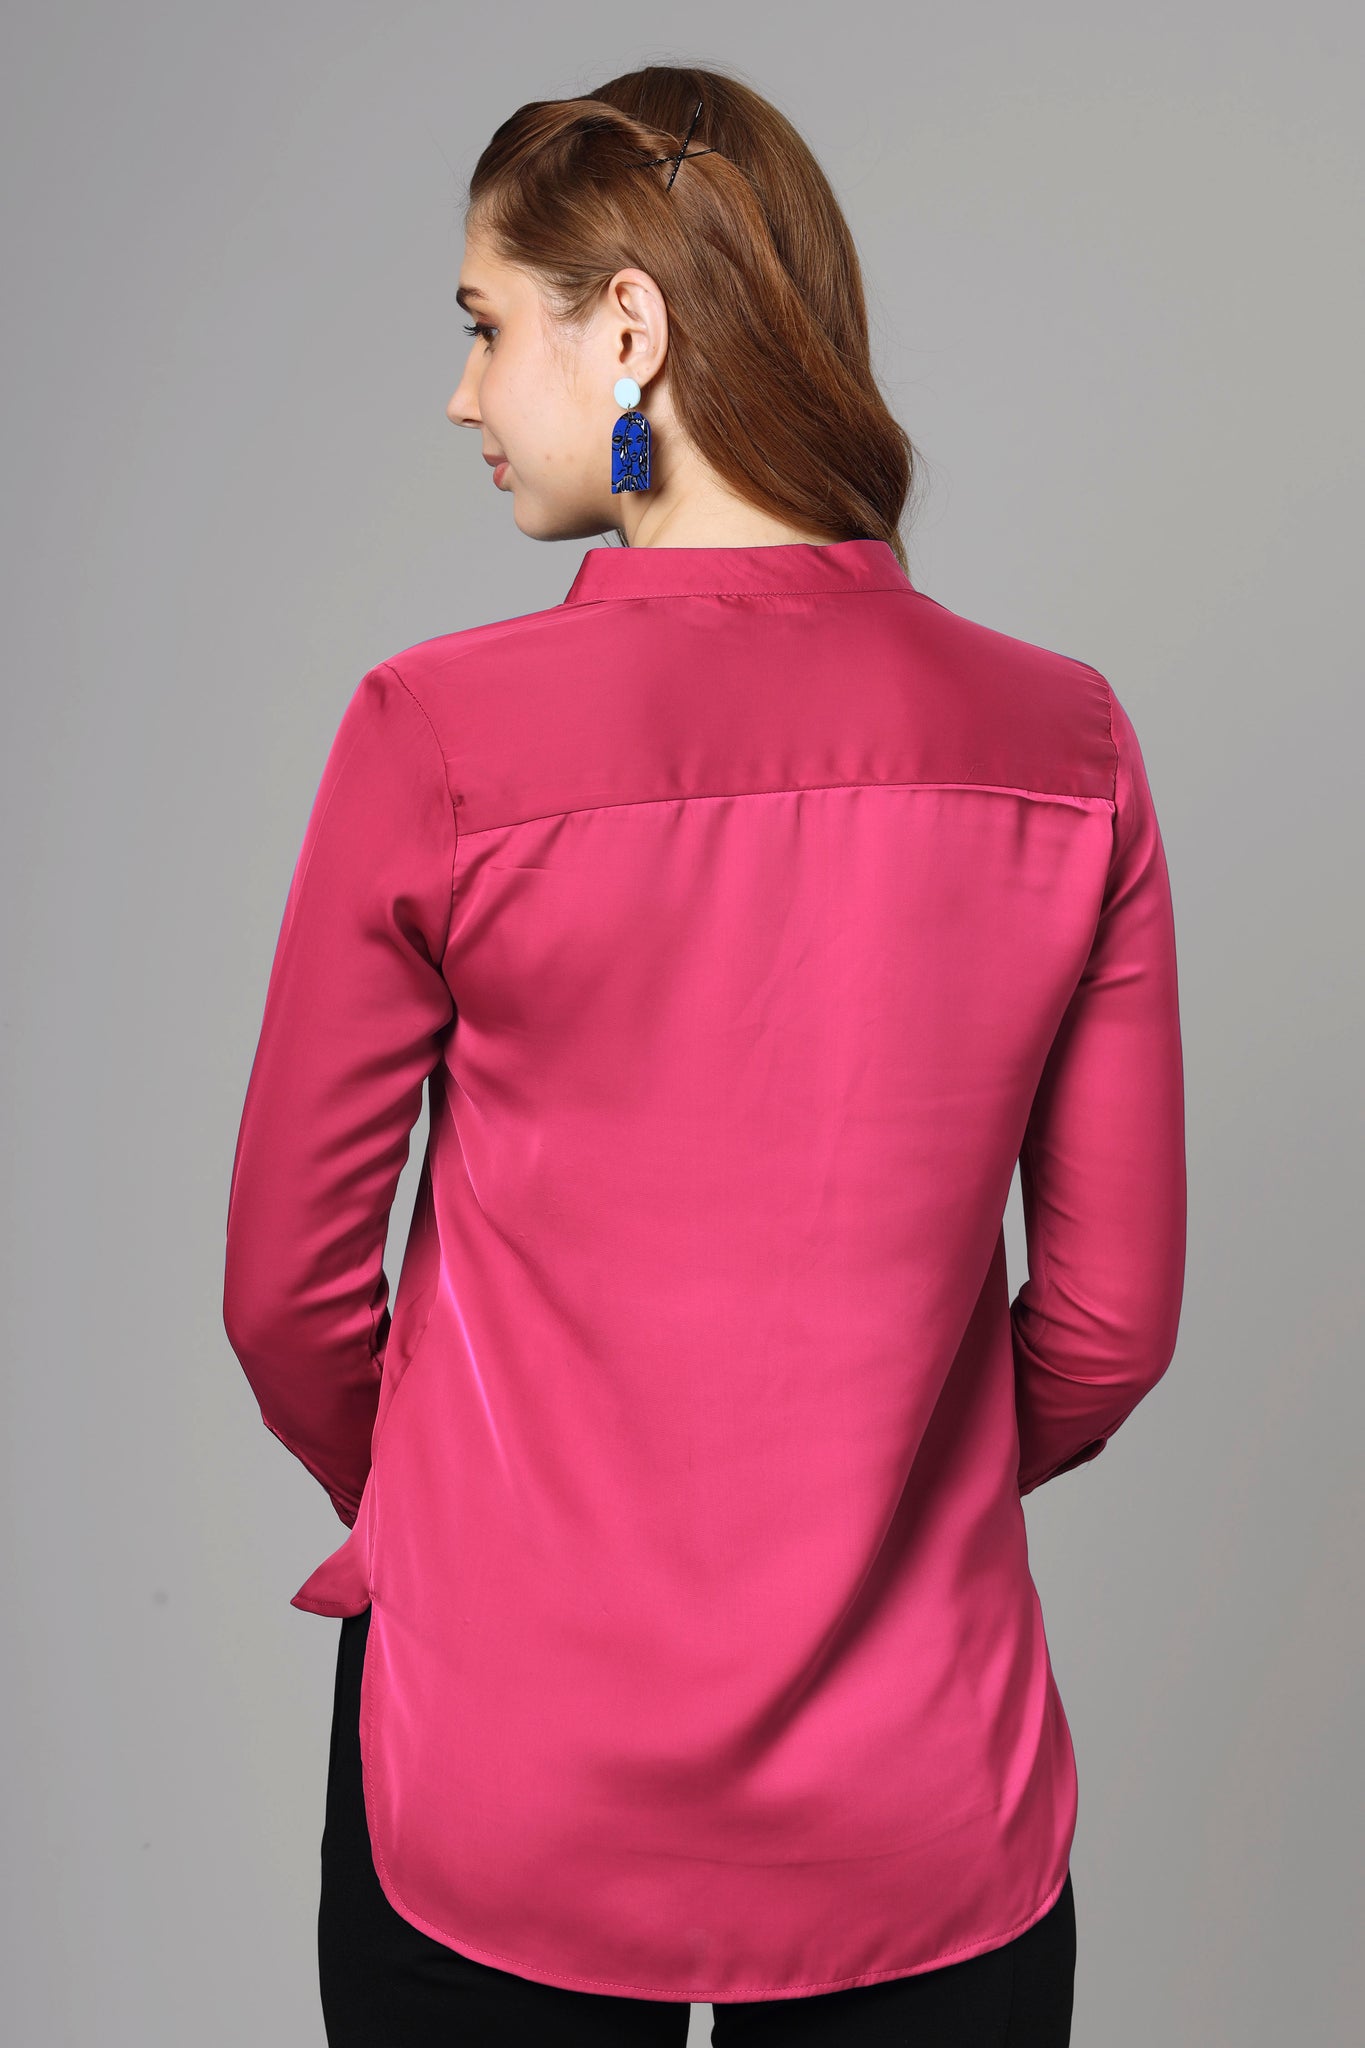 Classic Hot Pink Top For Women